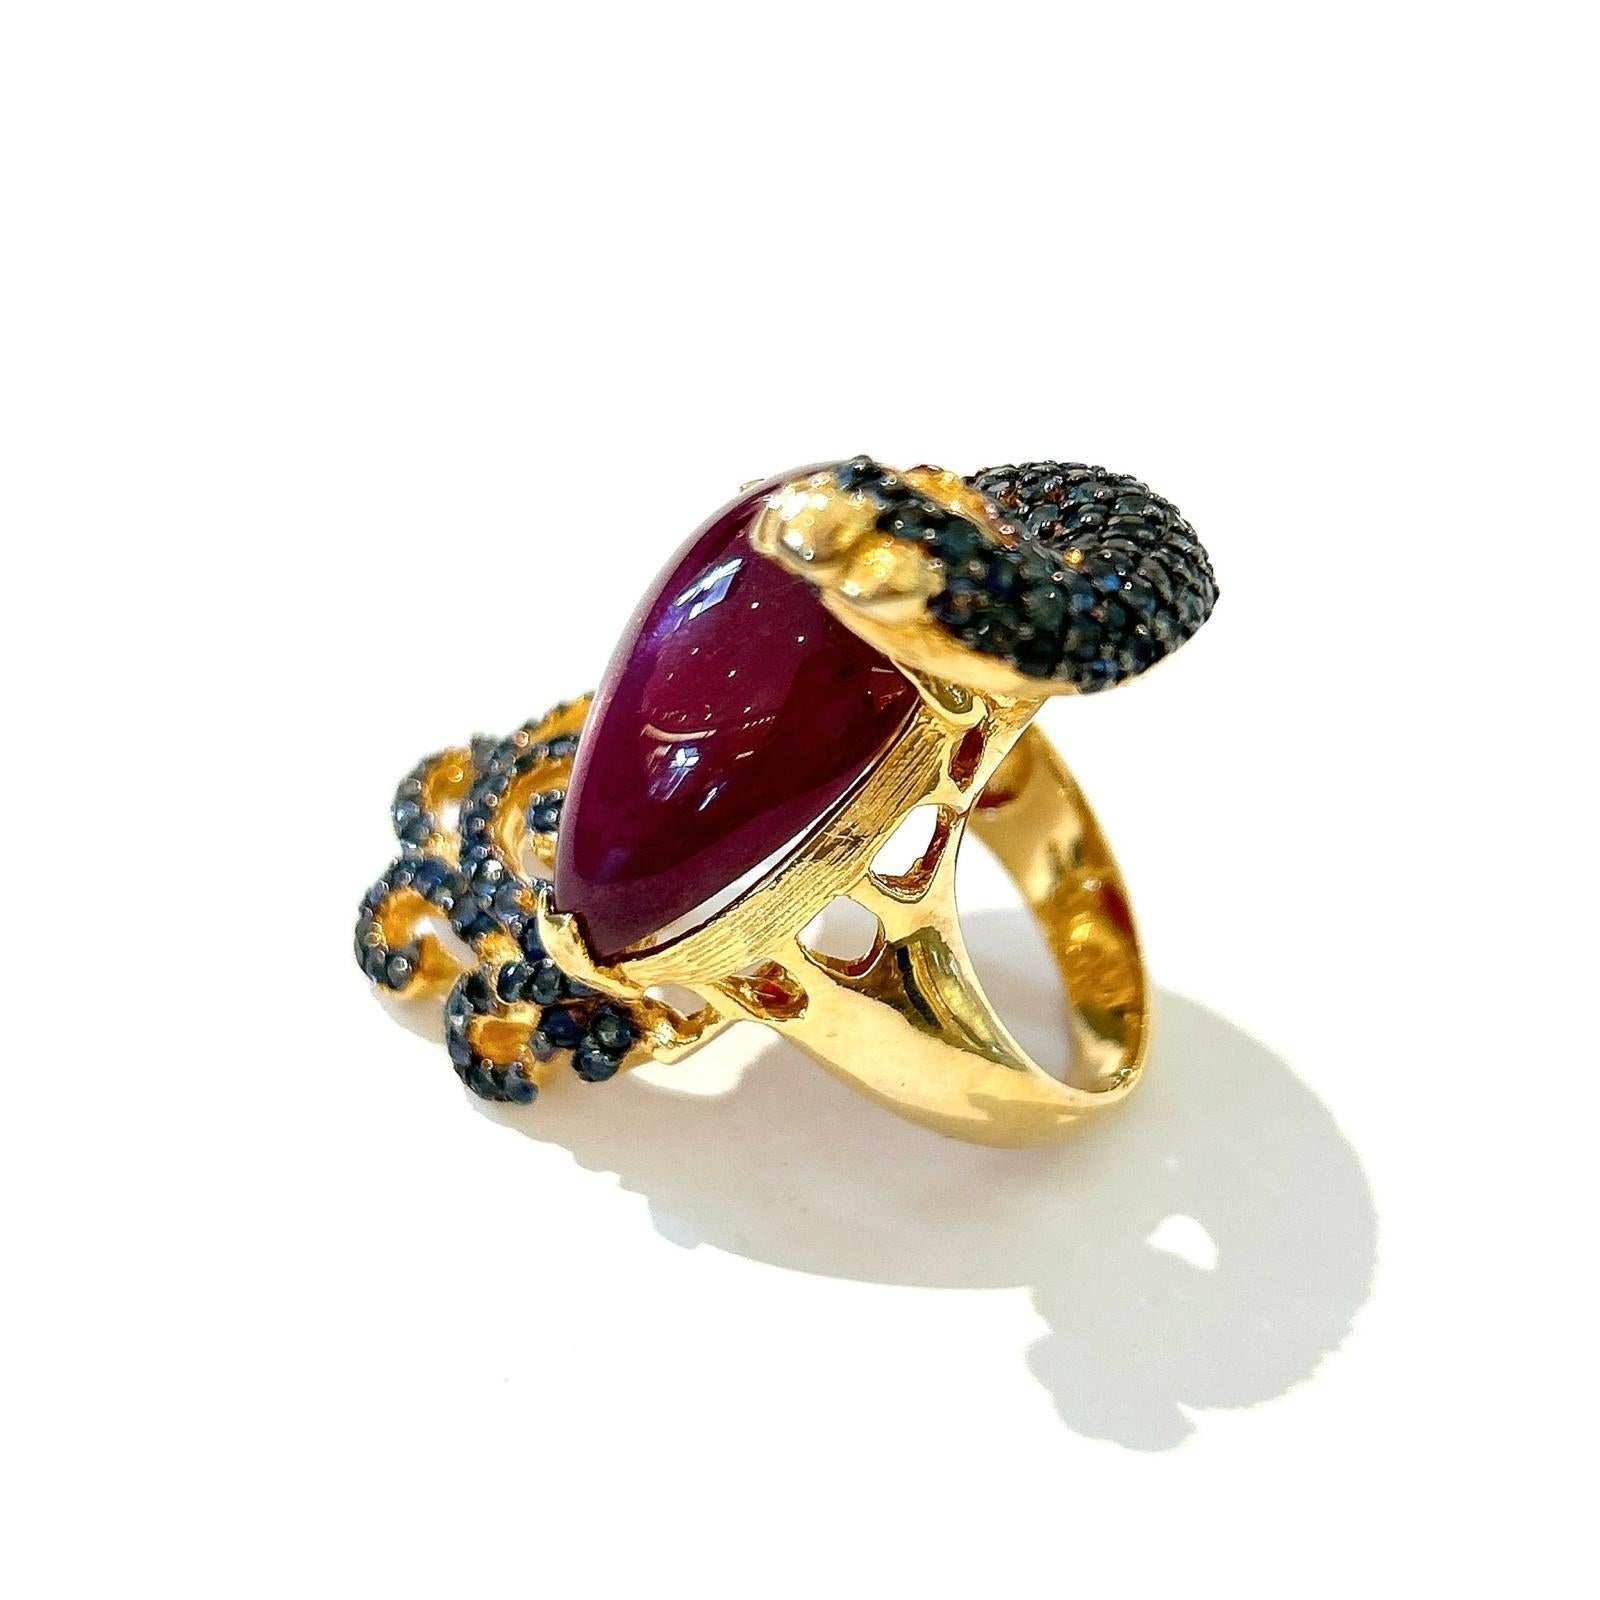 Bochic “Orient” Ruby & Sapphire Swan Cocktail Ring Set 18K & Silver  For Sale 2